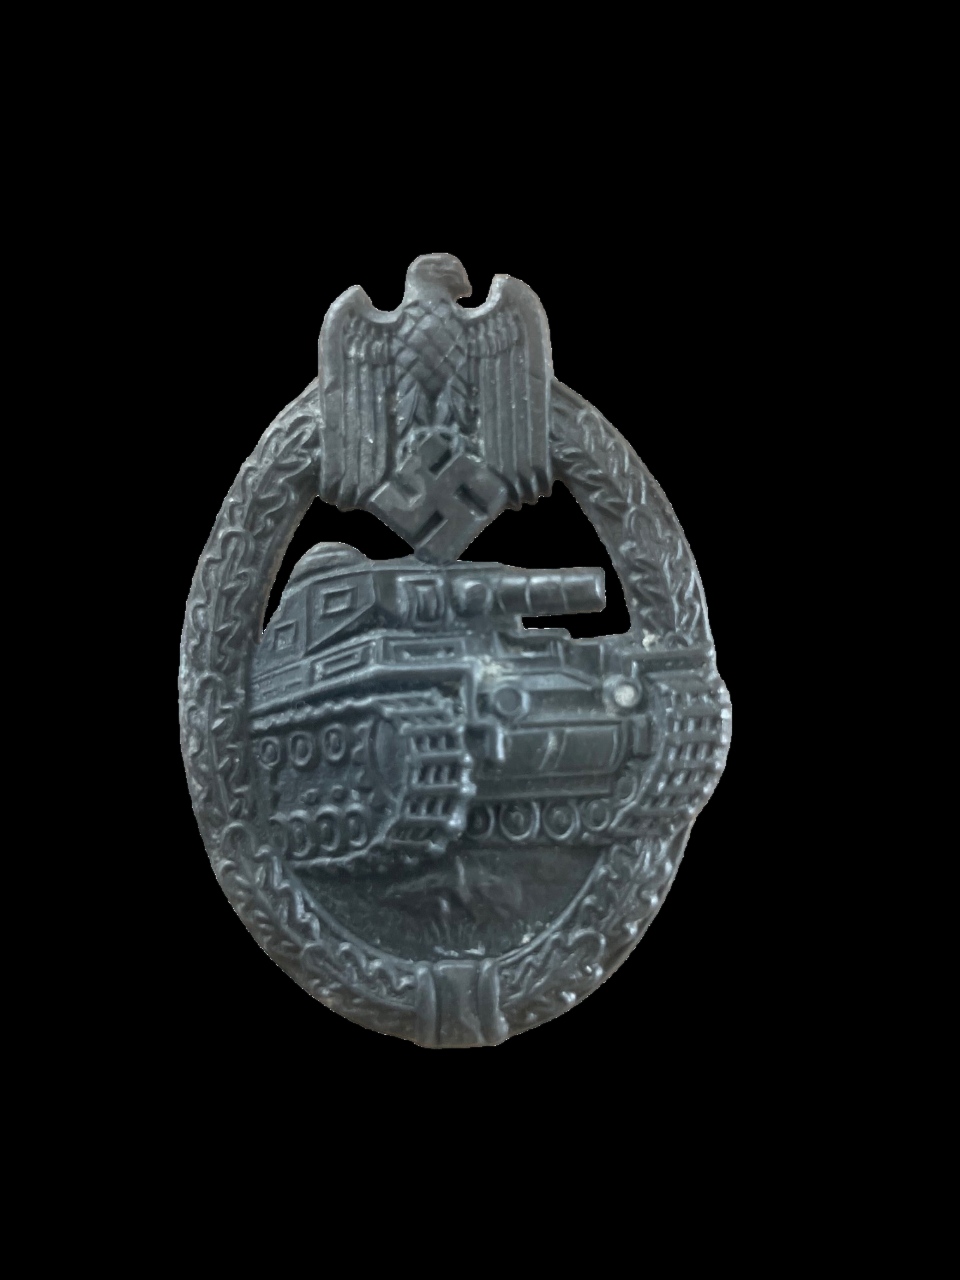 PANZER ASSAULT BADGE IN SILVER by Alois Rettemaier